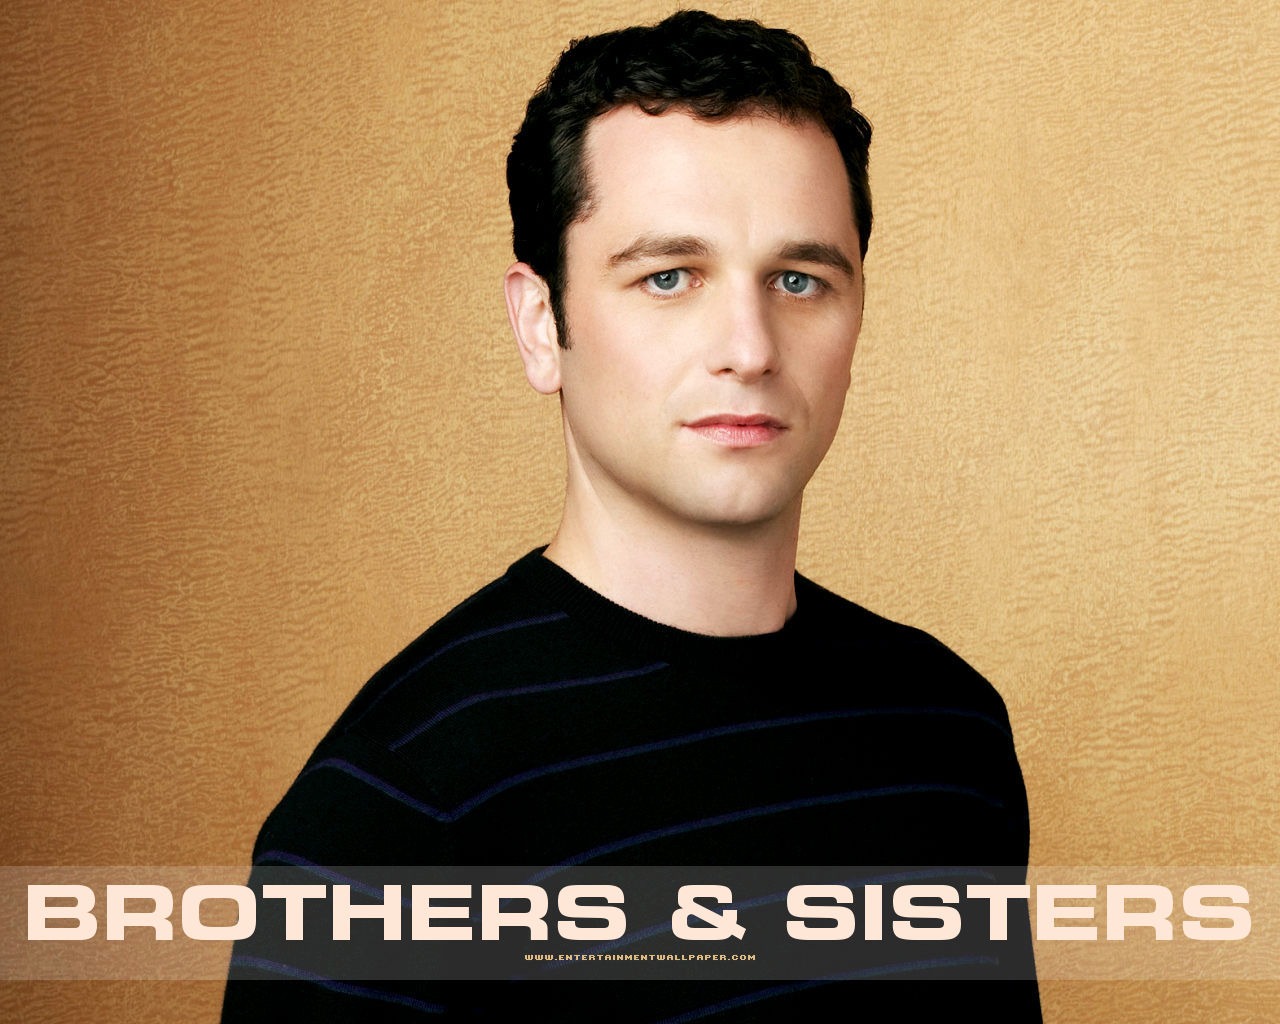 Brothers & Sisters 兄弟姐妹 #19 - 1280x1024